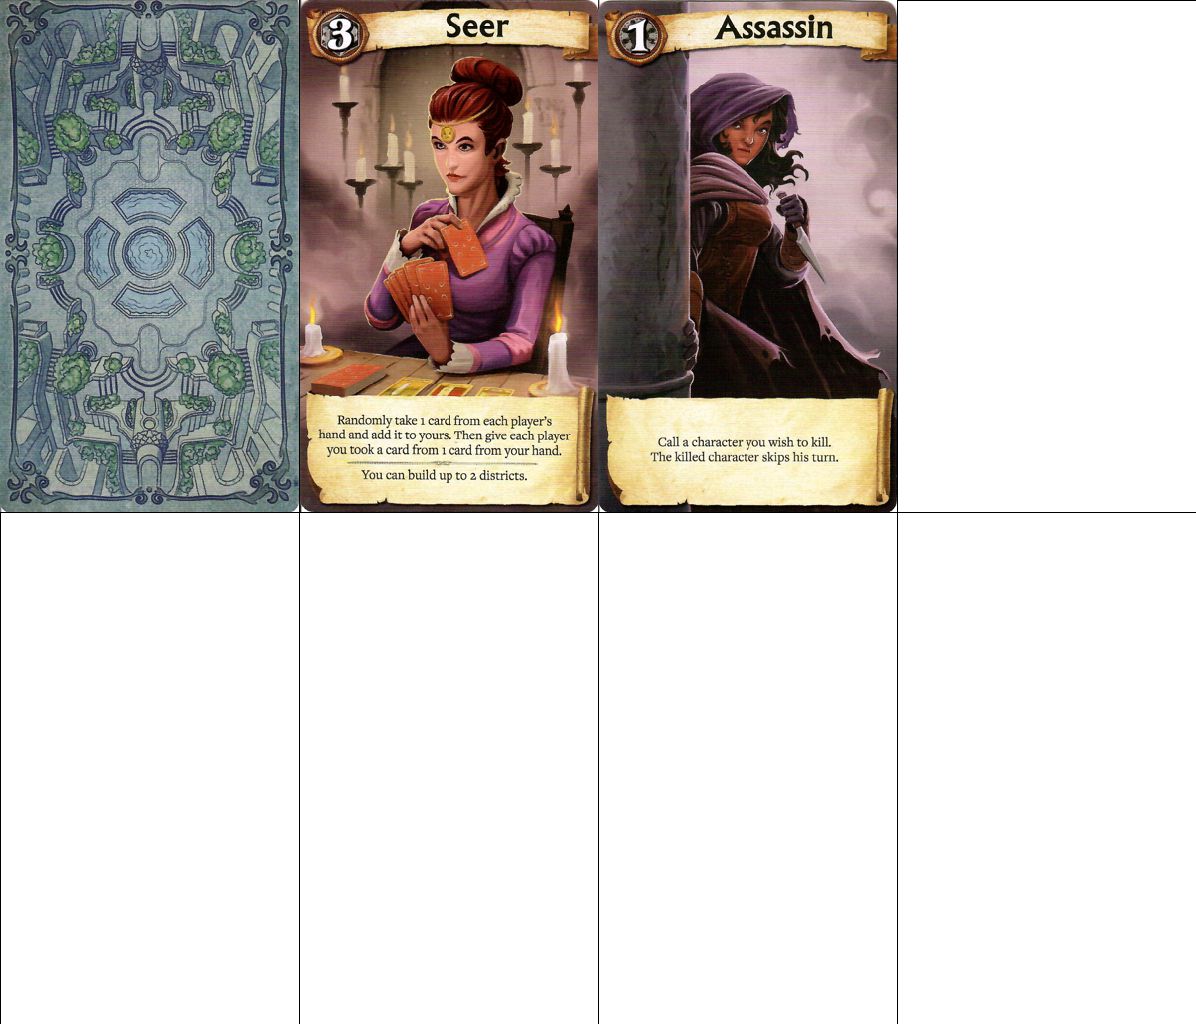 Character Cards